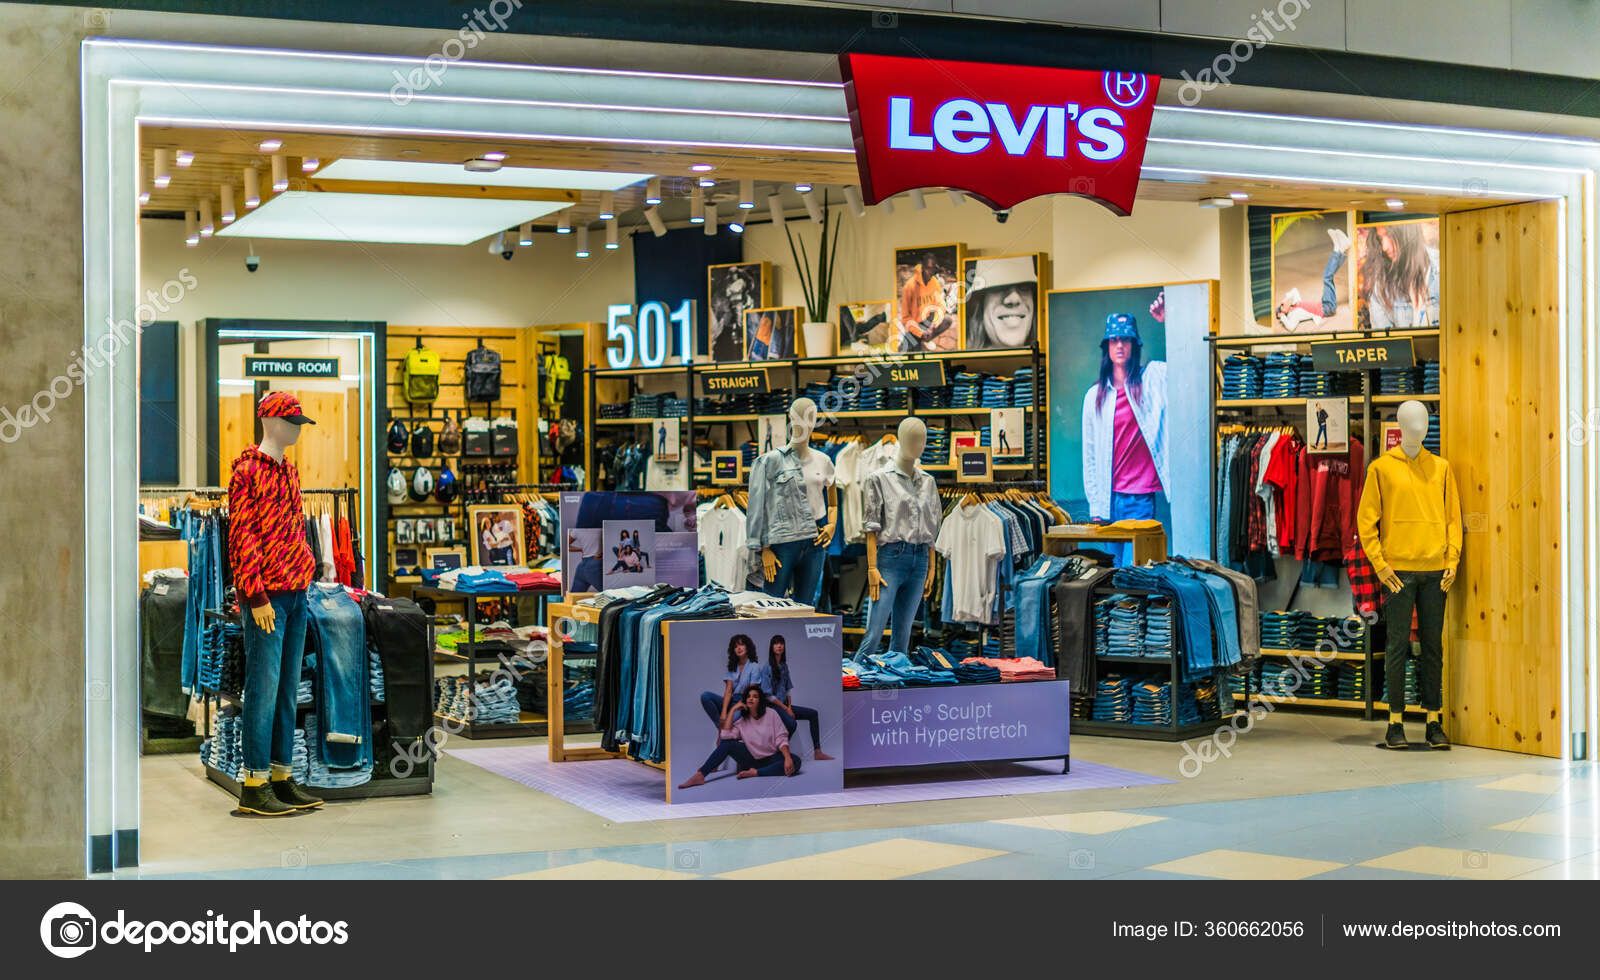 Levis store Stock Photos, Royalty Free Levis store Images | Depositphotos